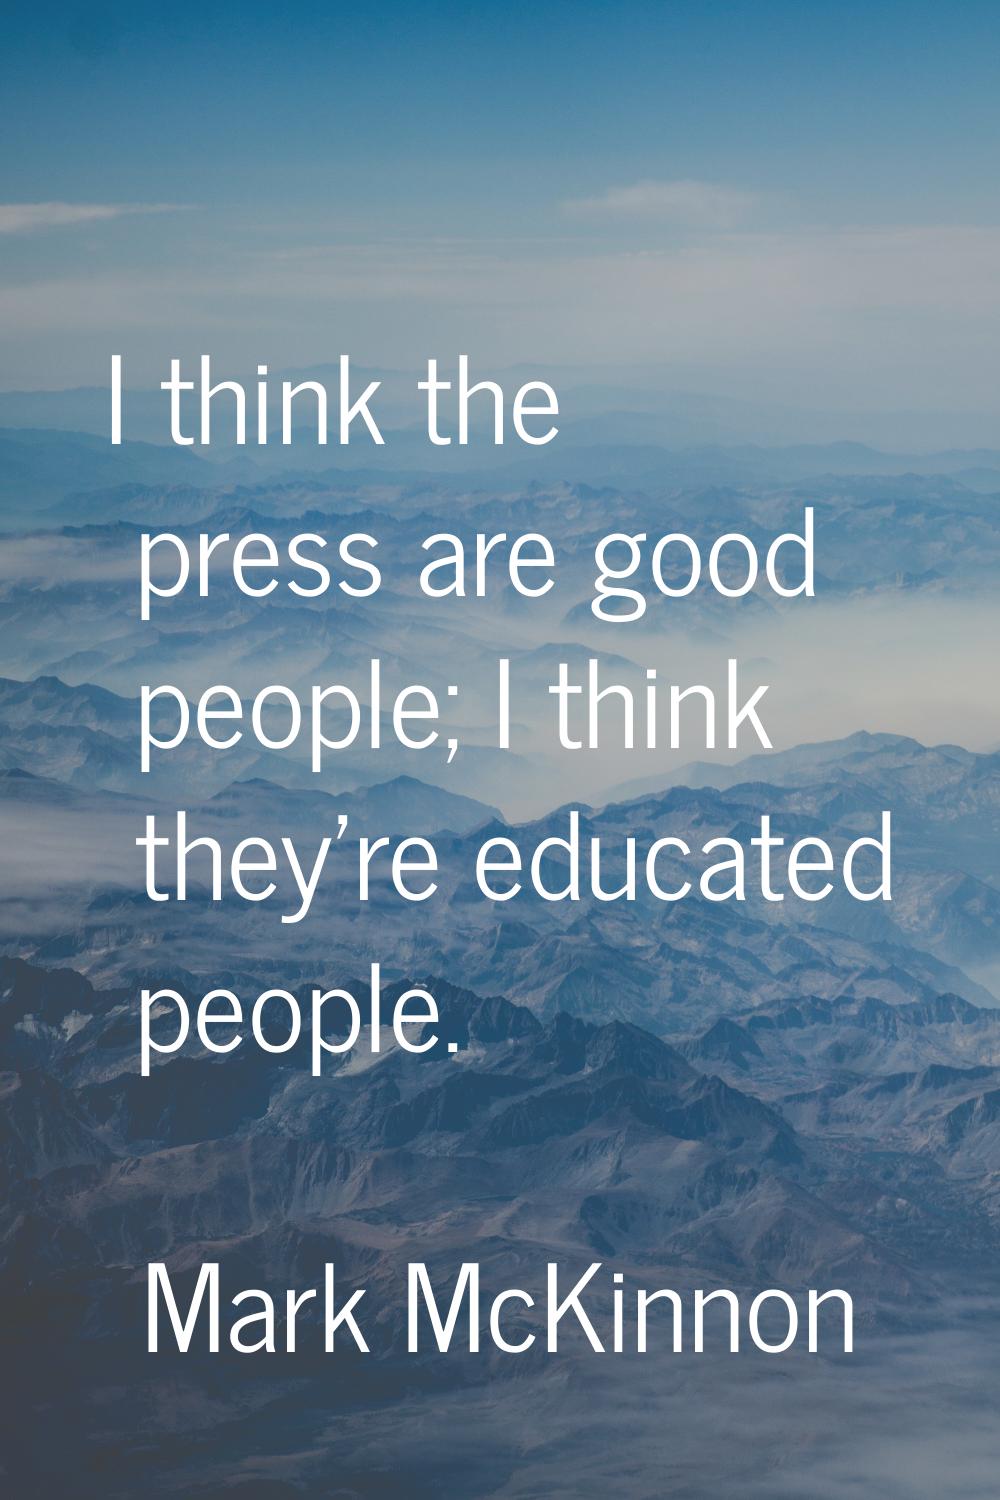 I think the press are good people; I think they're educated people.